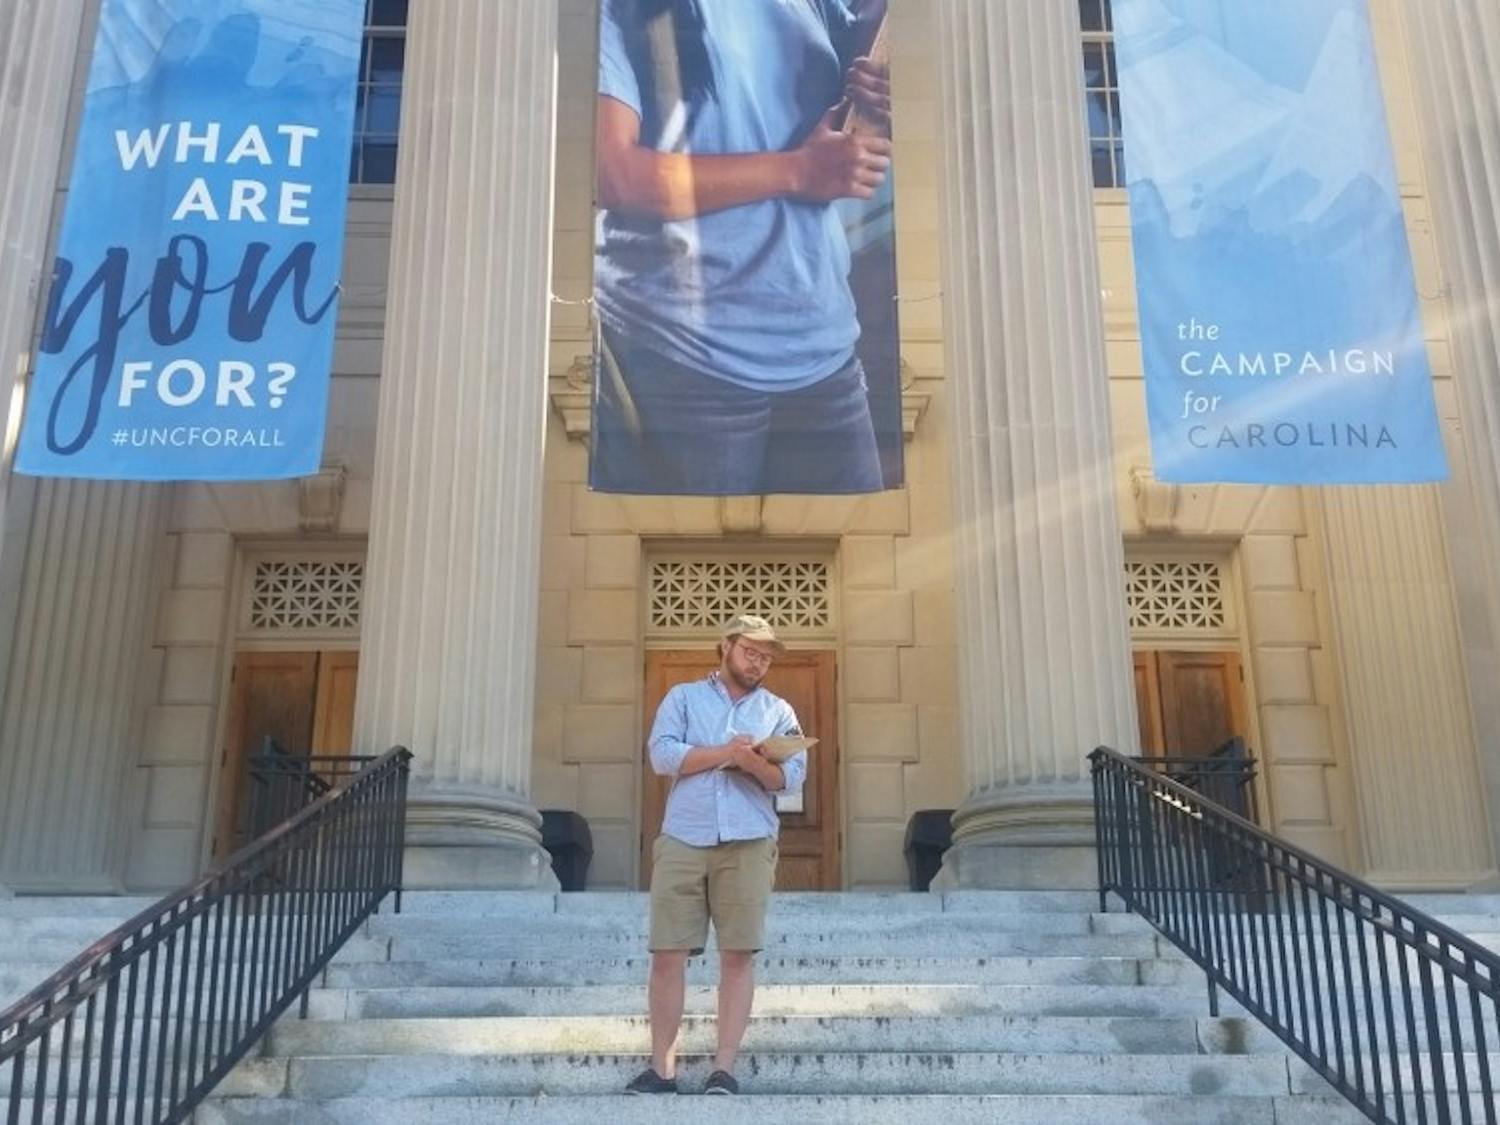 Brian Fields, a senior Political Science major, is involved in local politics and often volunteers to help students register to vote in Chapel Hill, NC.